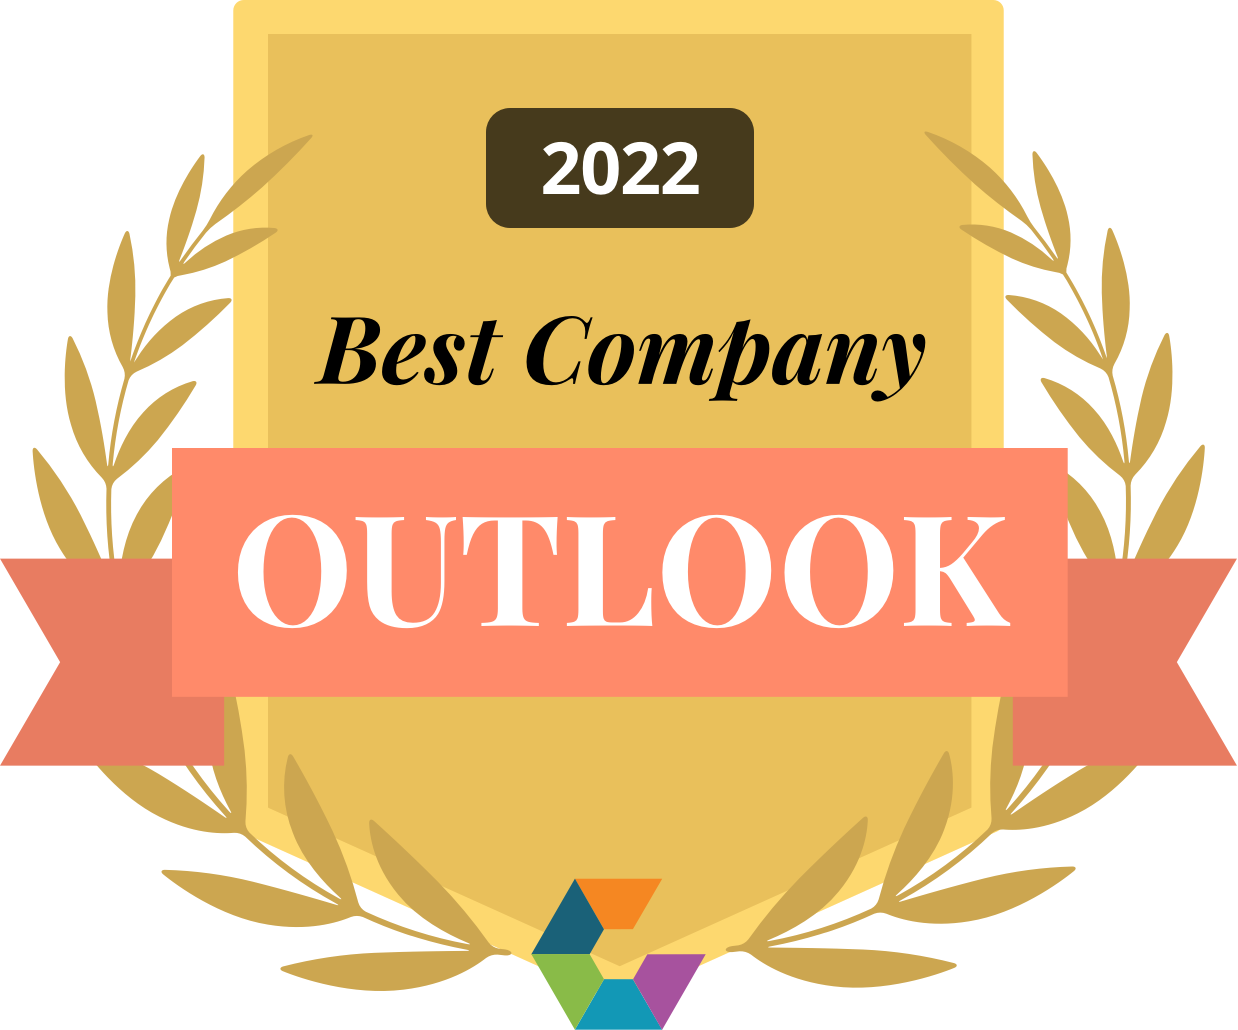 Best Company Outlook